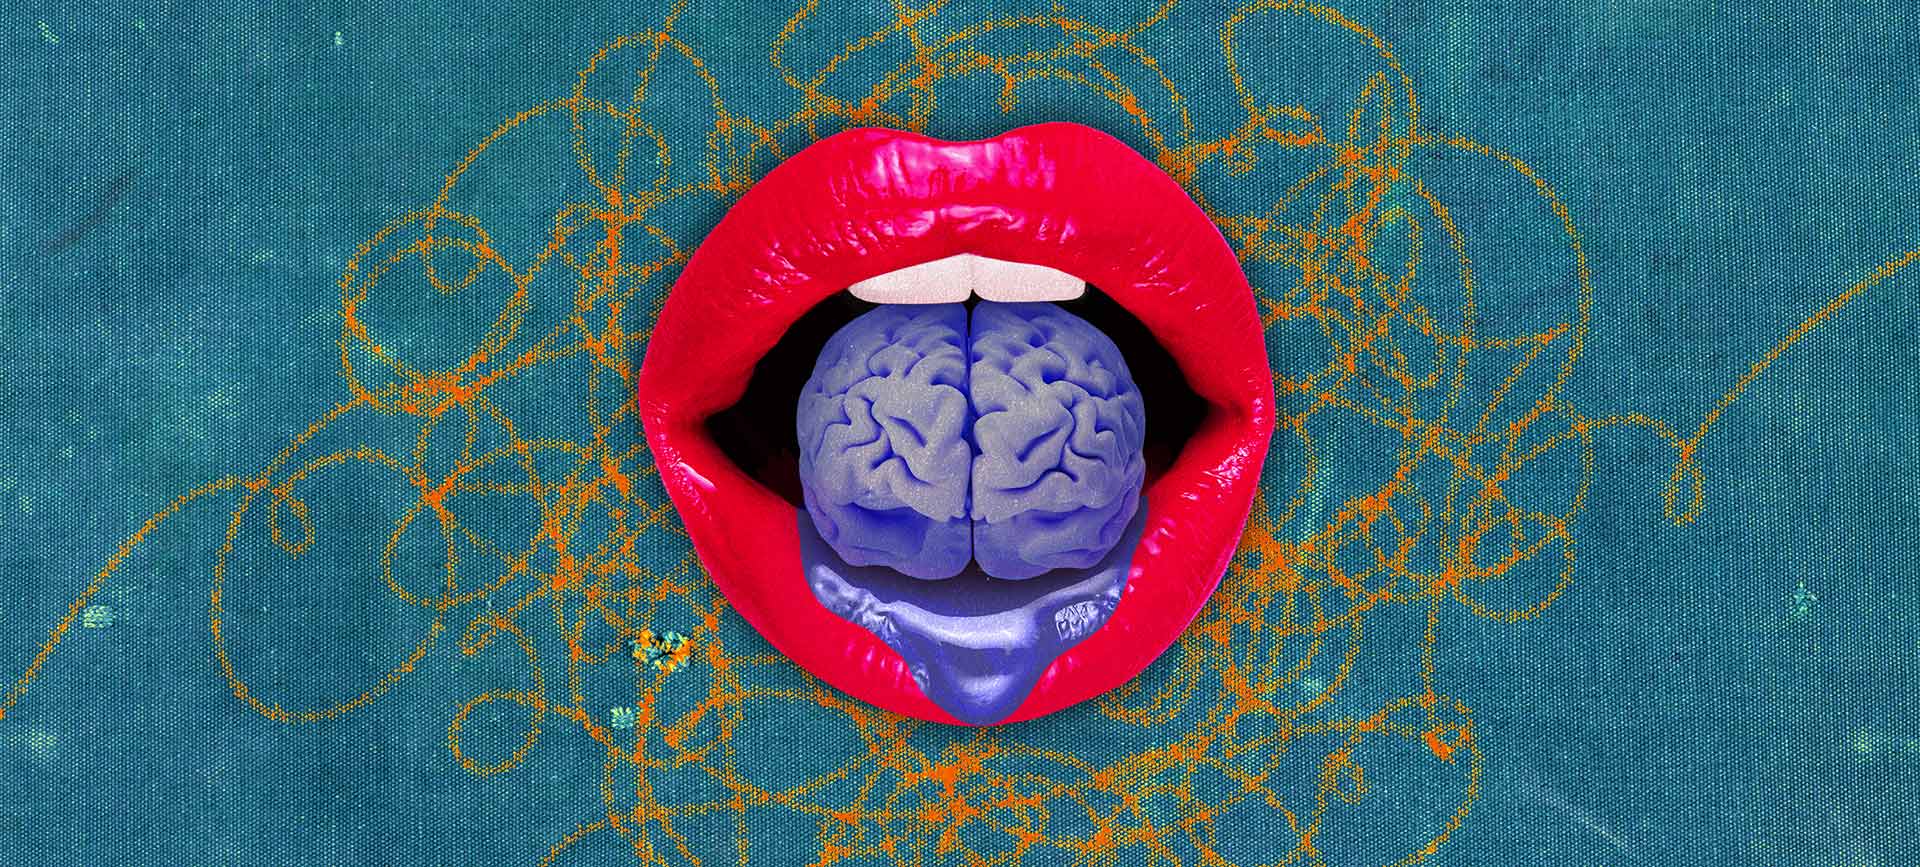 A purple brain sits between a pair of open red lips against a teal background.